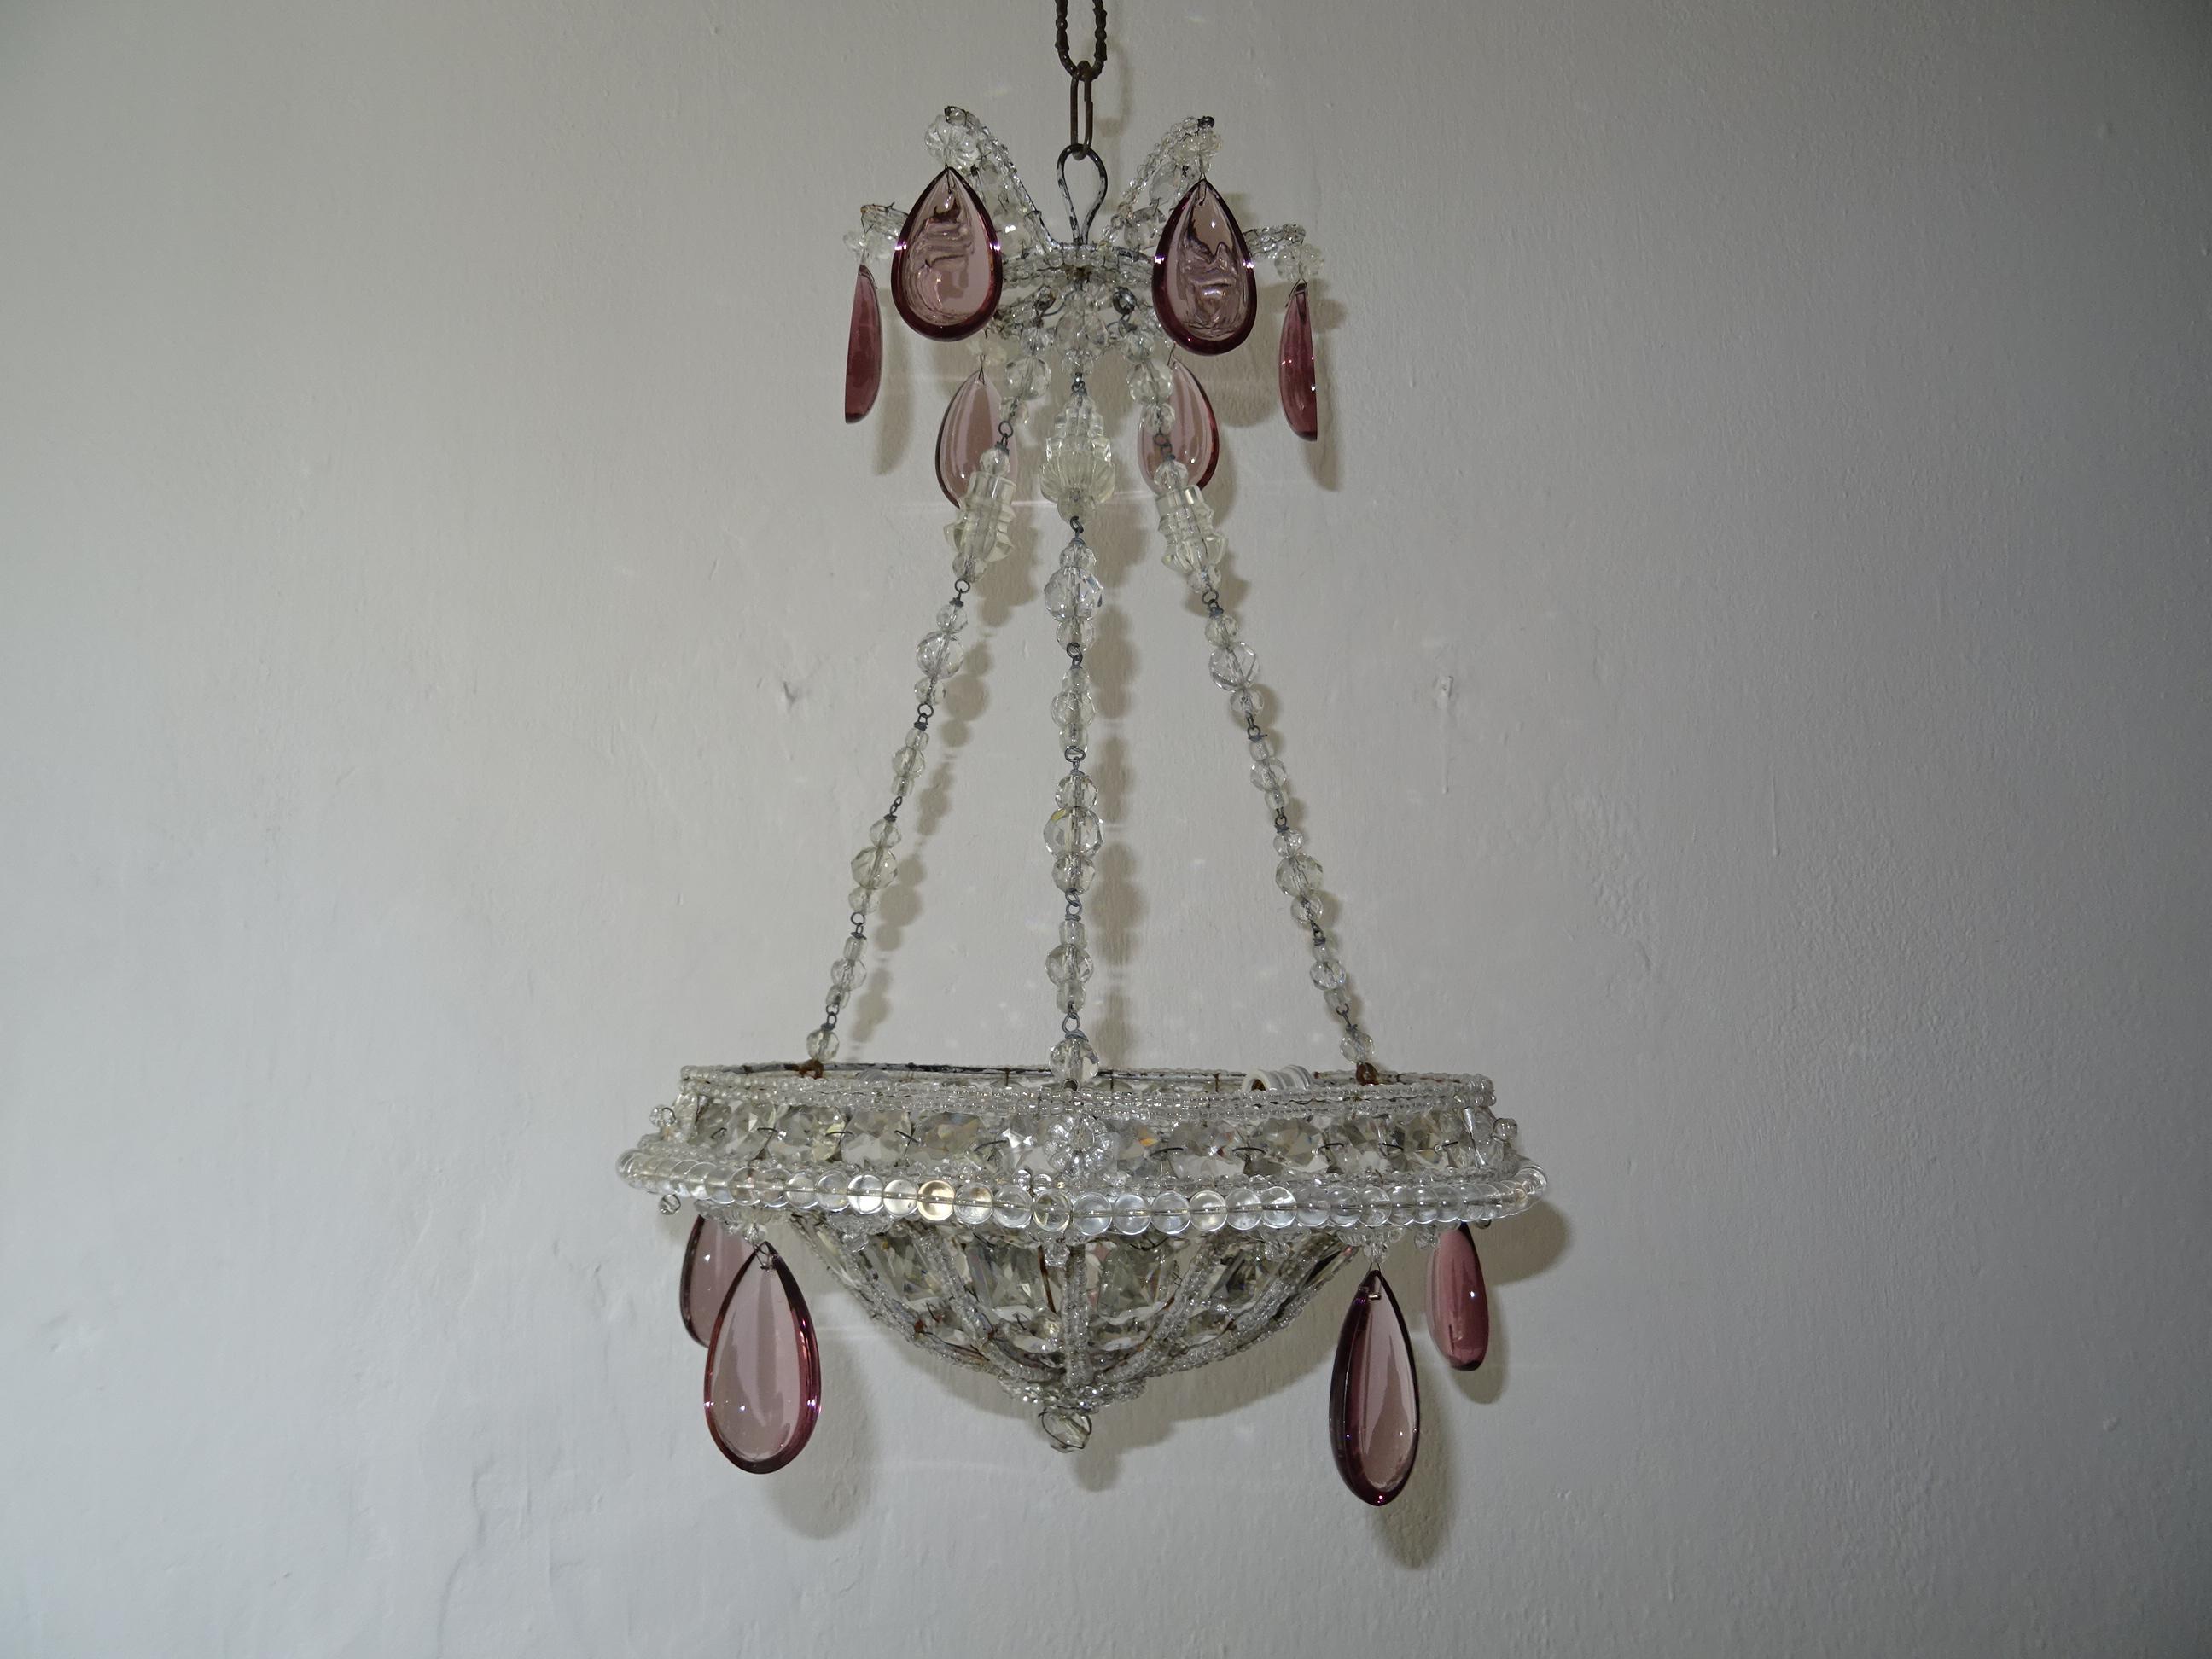 Housing 3 lights, will be newly rewired with certified US UL sockets for the USA and appropriate socket for all other countries. A rare example of Maison Baguès. So many crystal beads and prisms in all different sizes and shapes. Beaded throughout,